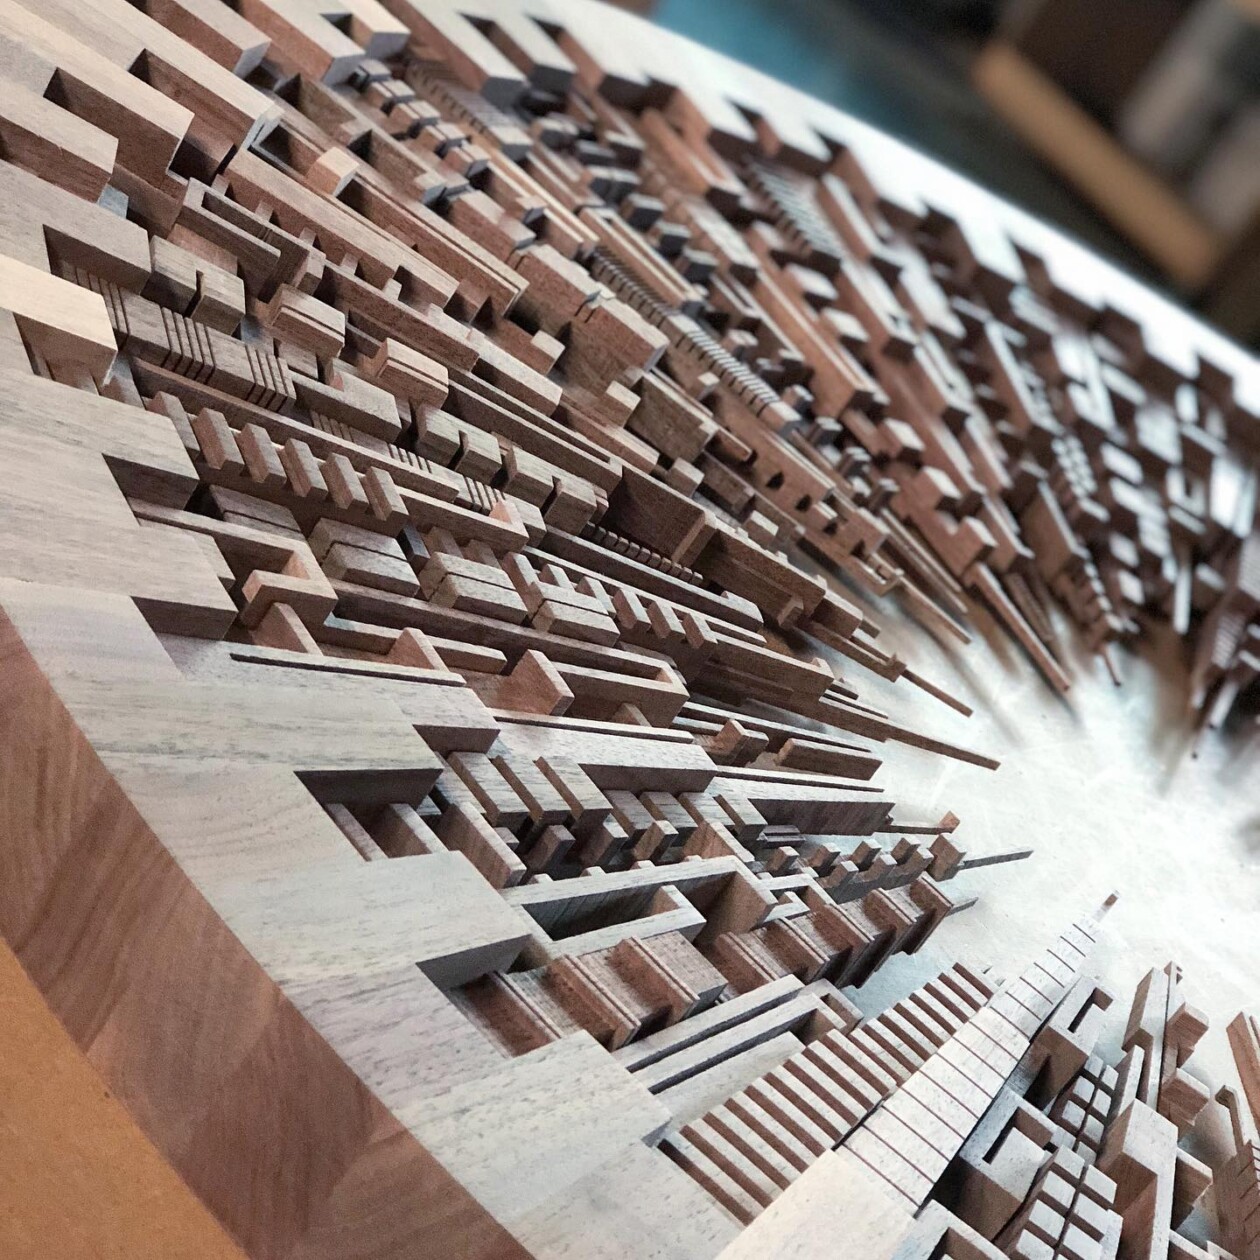 Intricate Cityscape Sculptures Made From Scrap Wood By James Mcnabb (4)